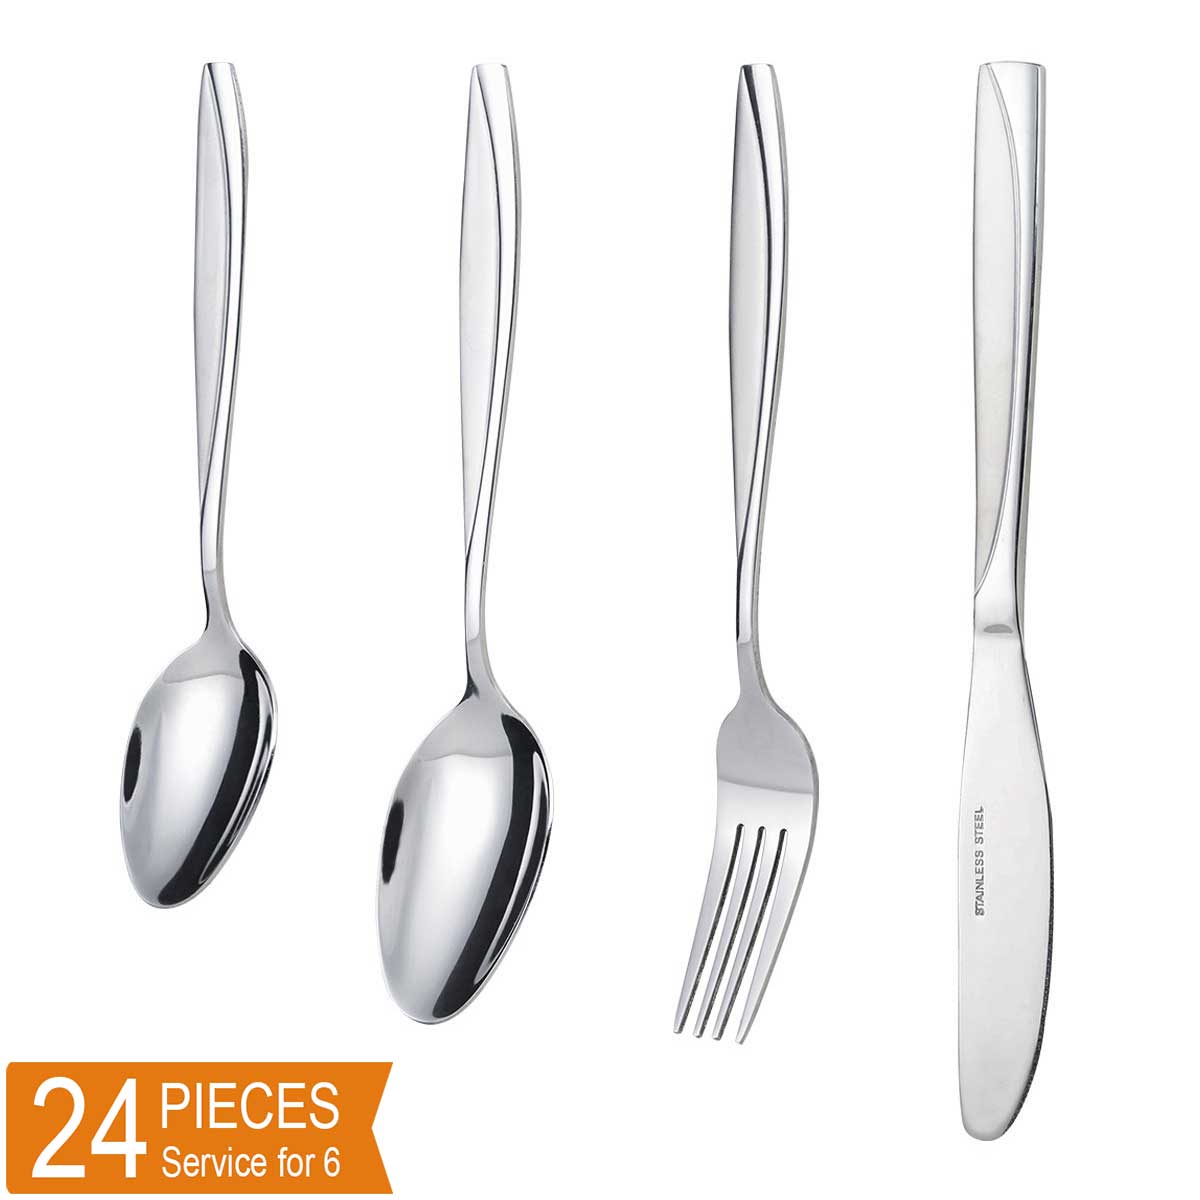 Silverware Set,  MDEALY 24 Piece Silverware Set, Stainless Steel Knife Fork Spoon set for 6 with Gift Box - image 1 of 6